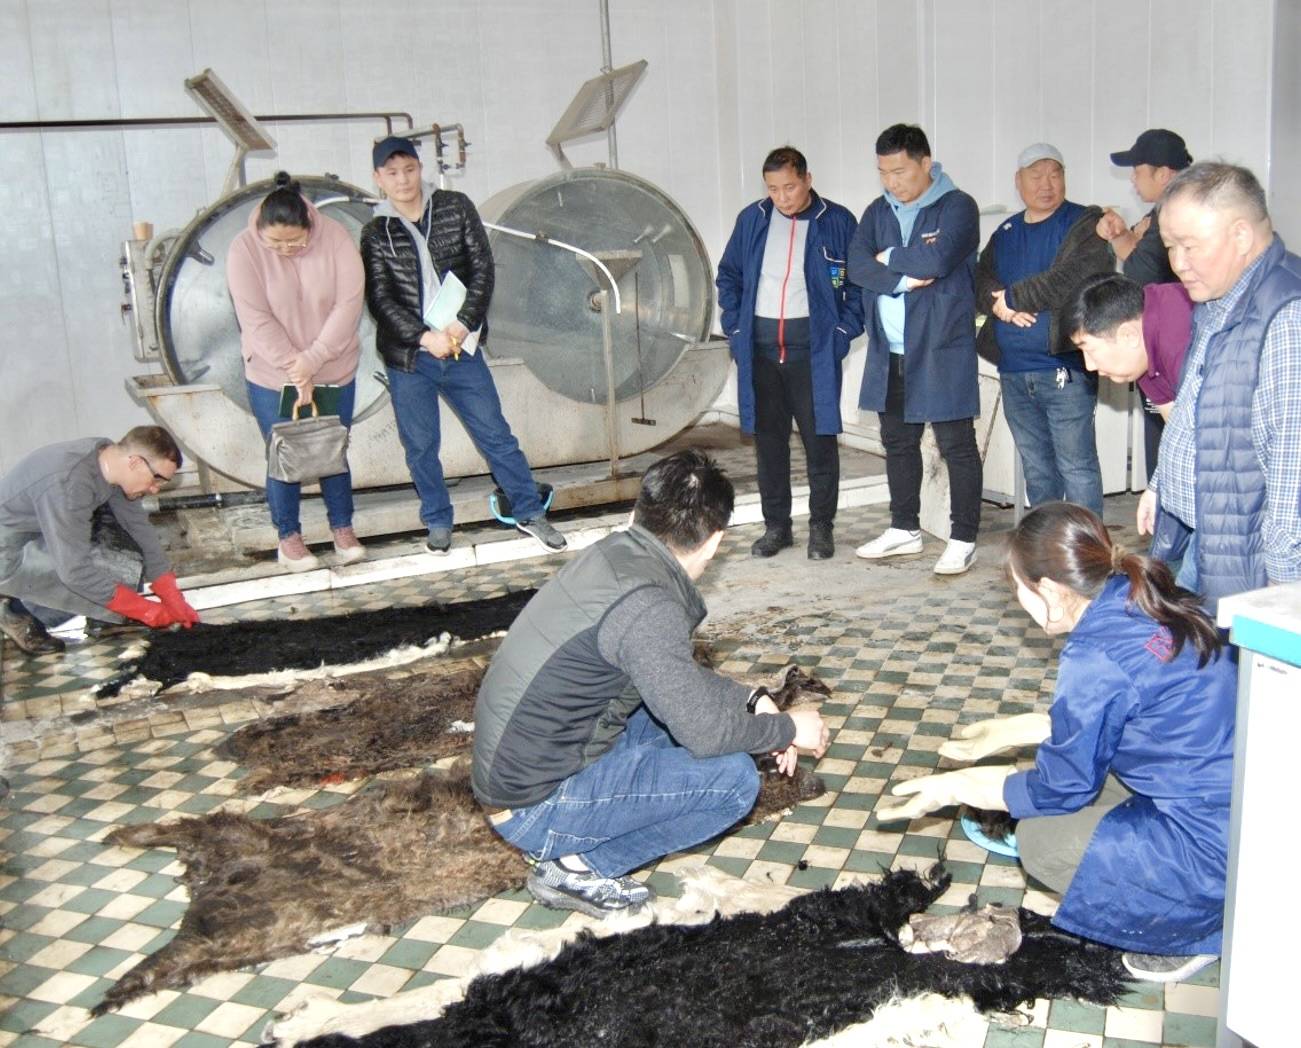 Yak Leather Industry in Mongolia taking steps towards sustainability